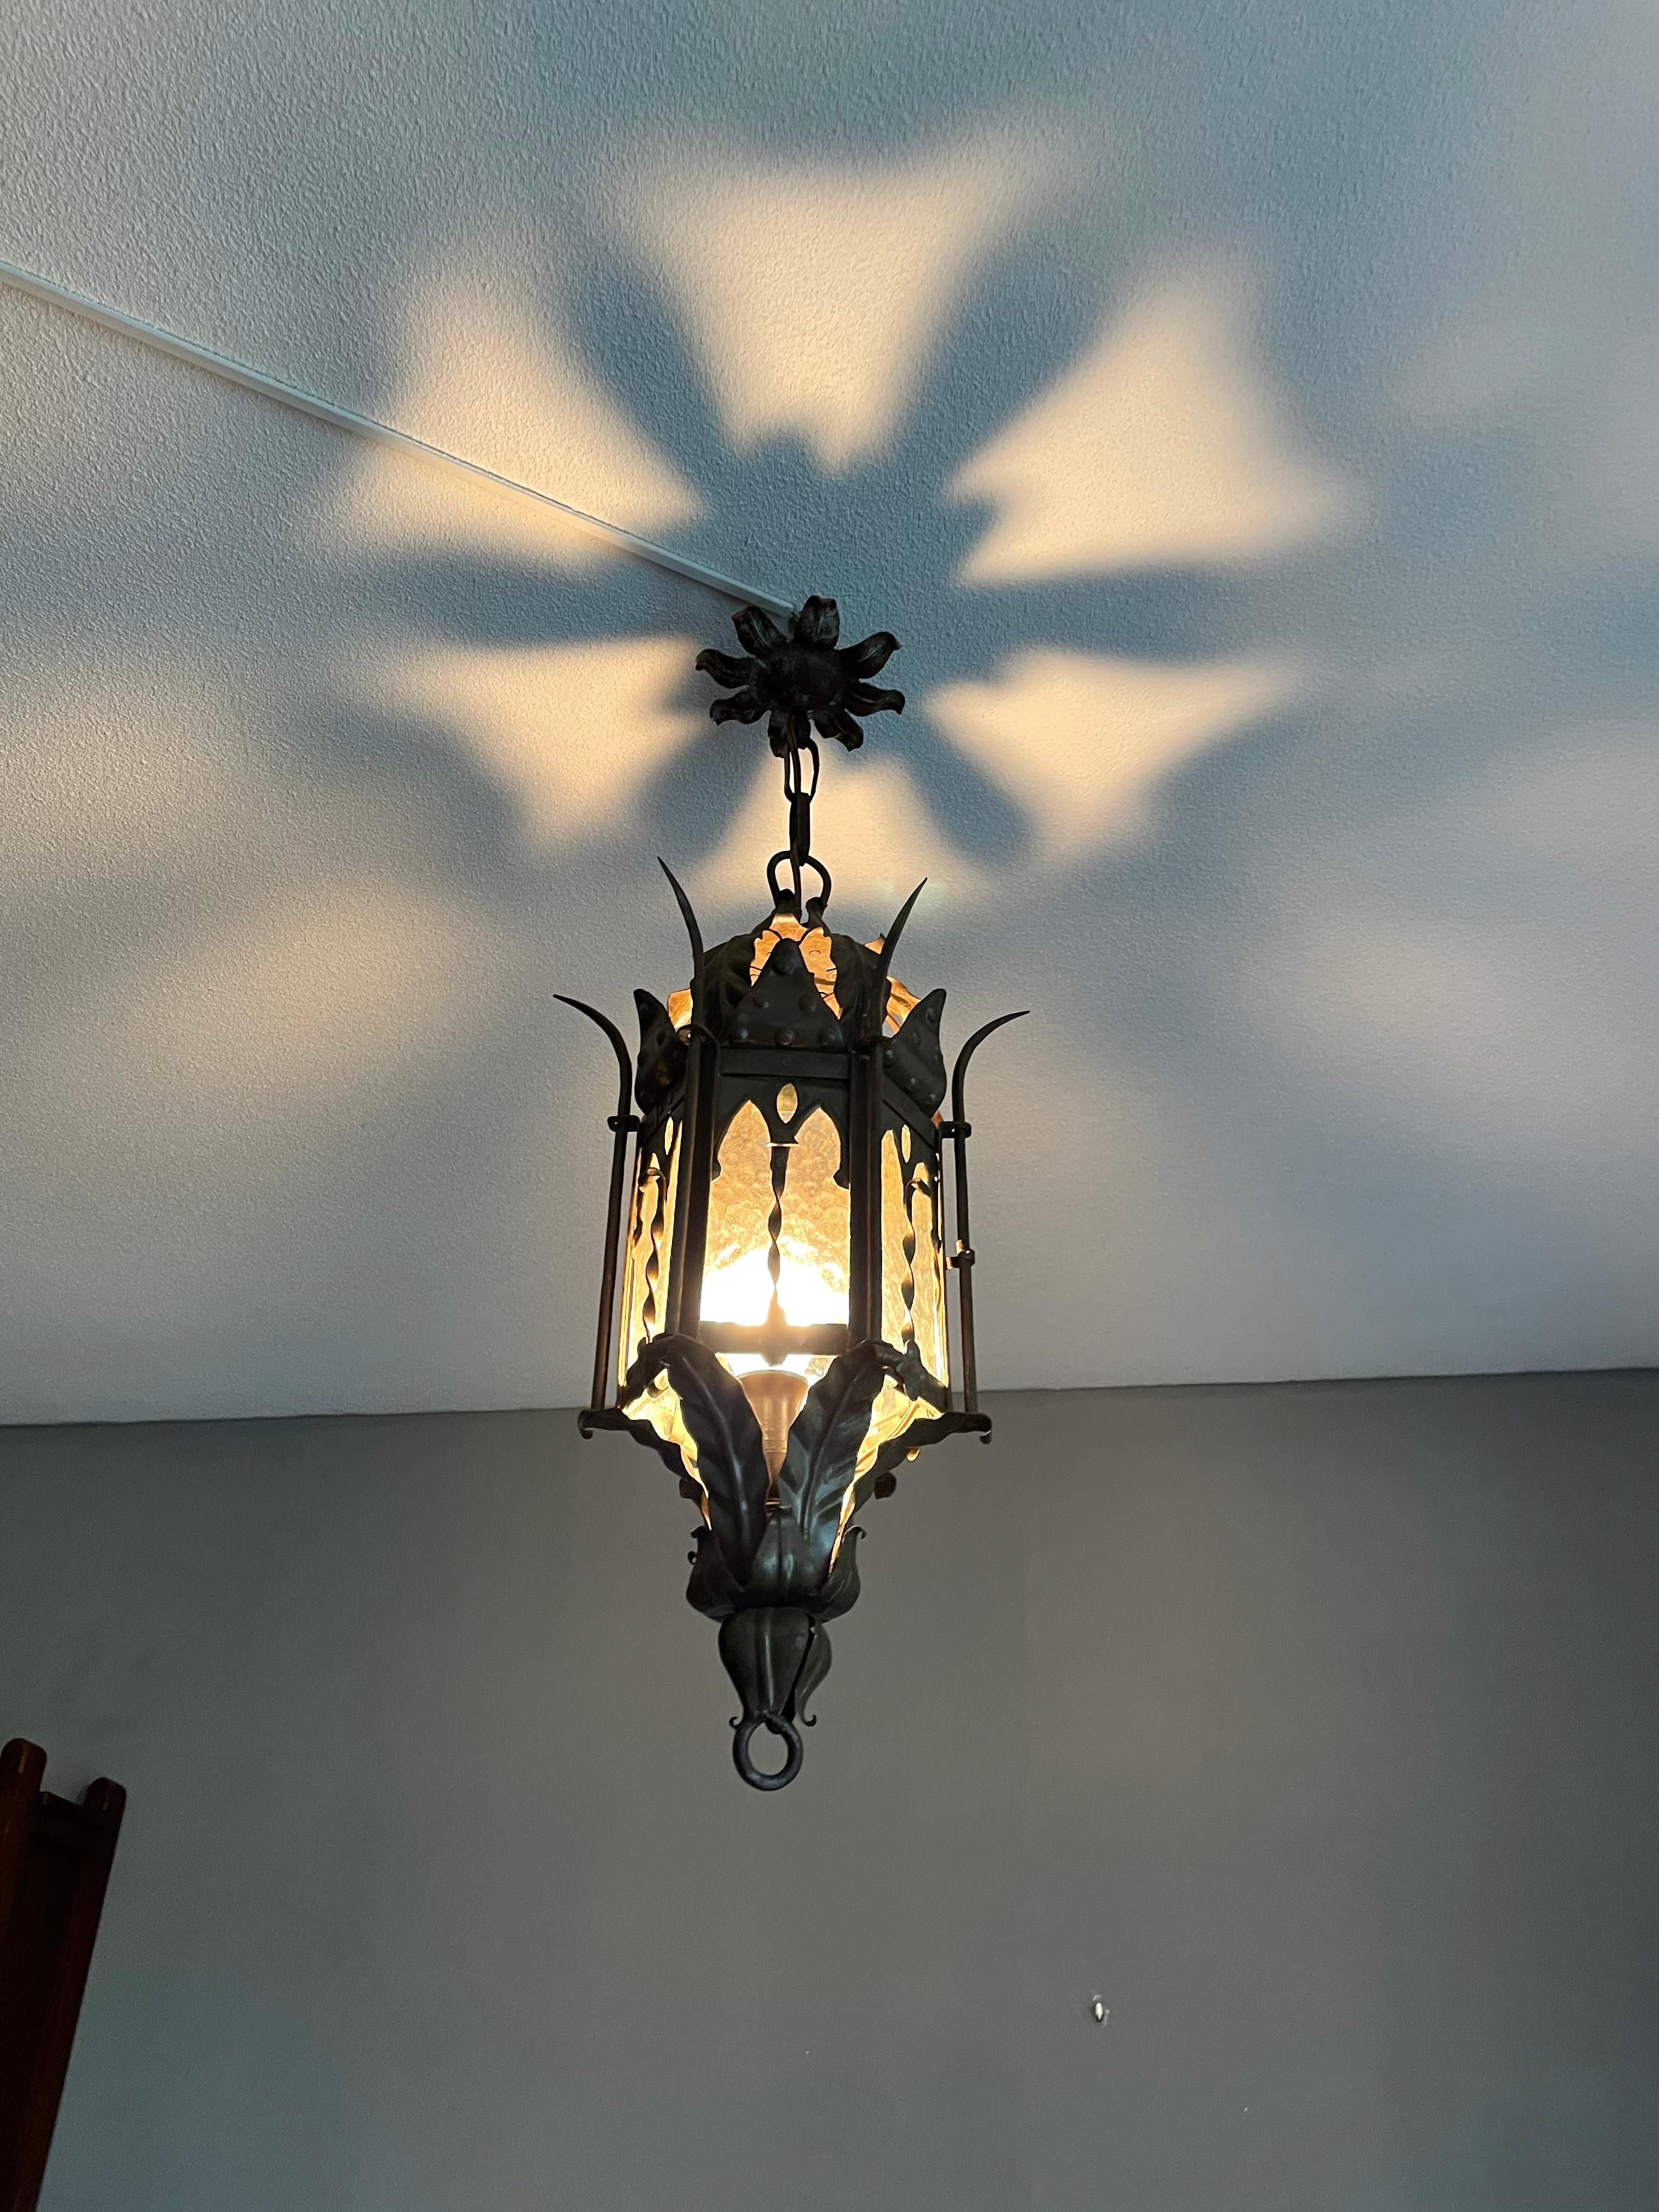 All handcrafted, hexagonal Gothic light fixture.

If you are a collector of rare and ancient looking Gothic antiques then this good size and possibly one of a kind pendant could be flying your way soon. With antique light fixtures as one of our